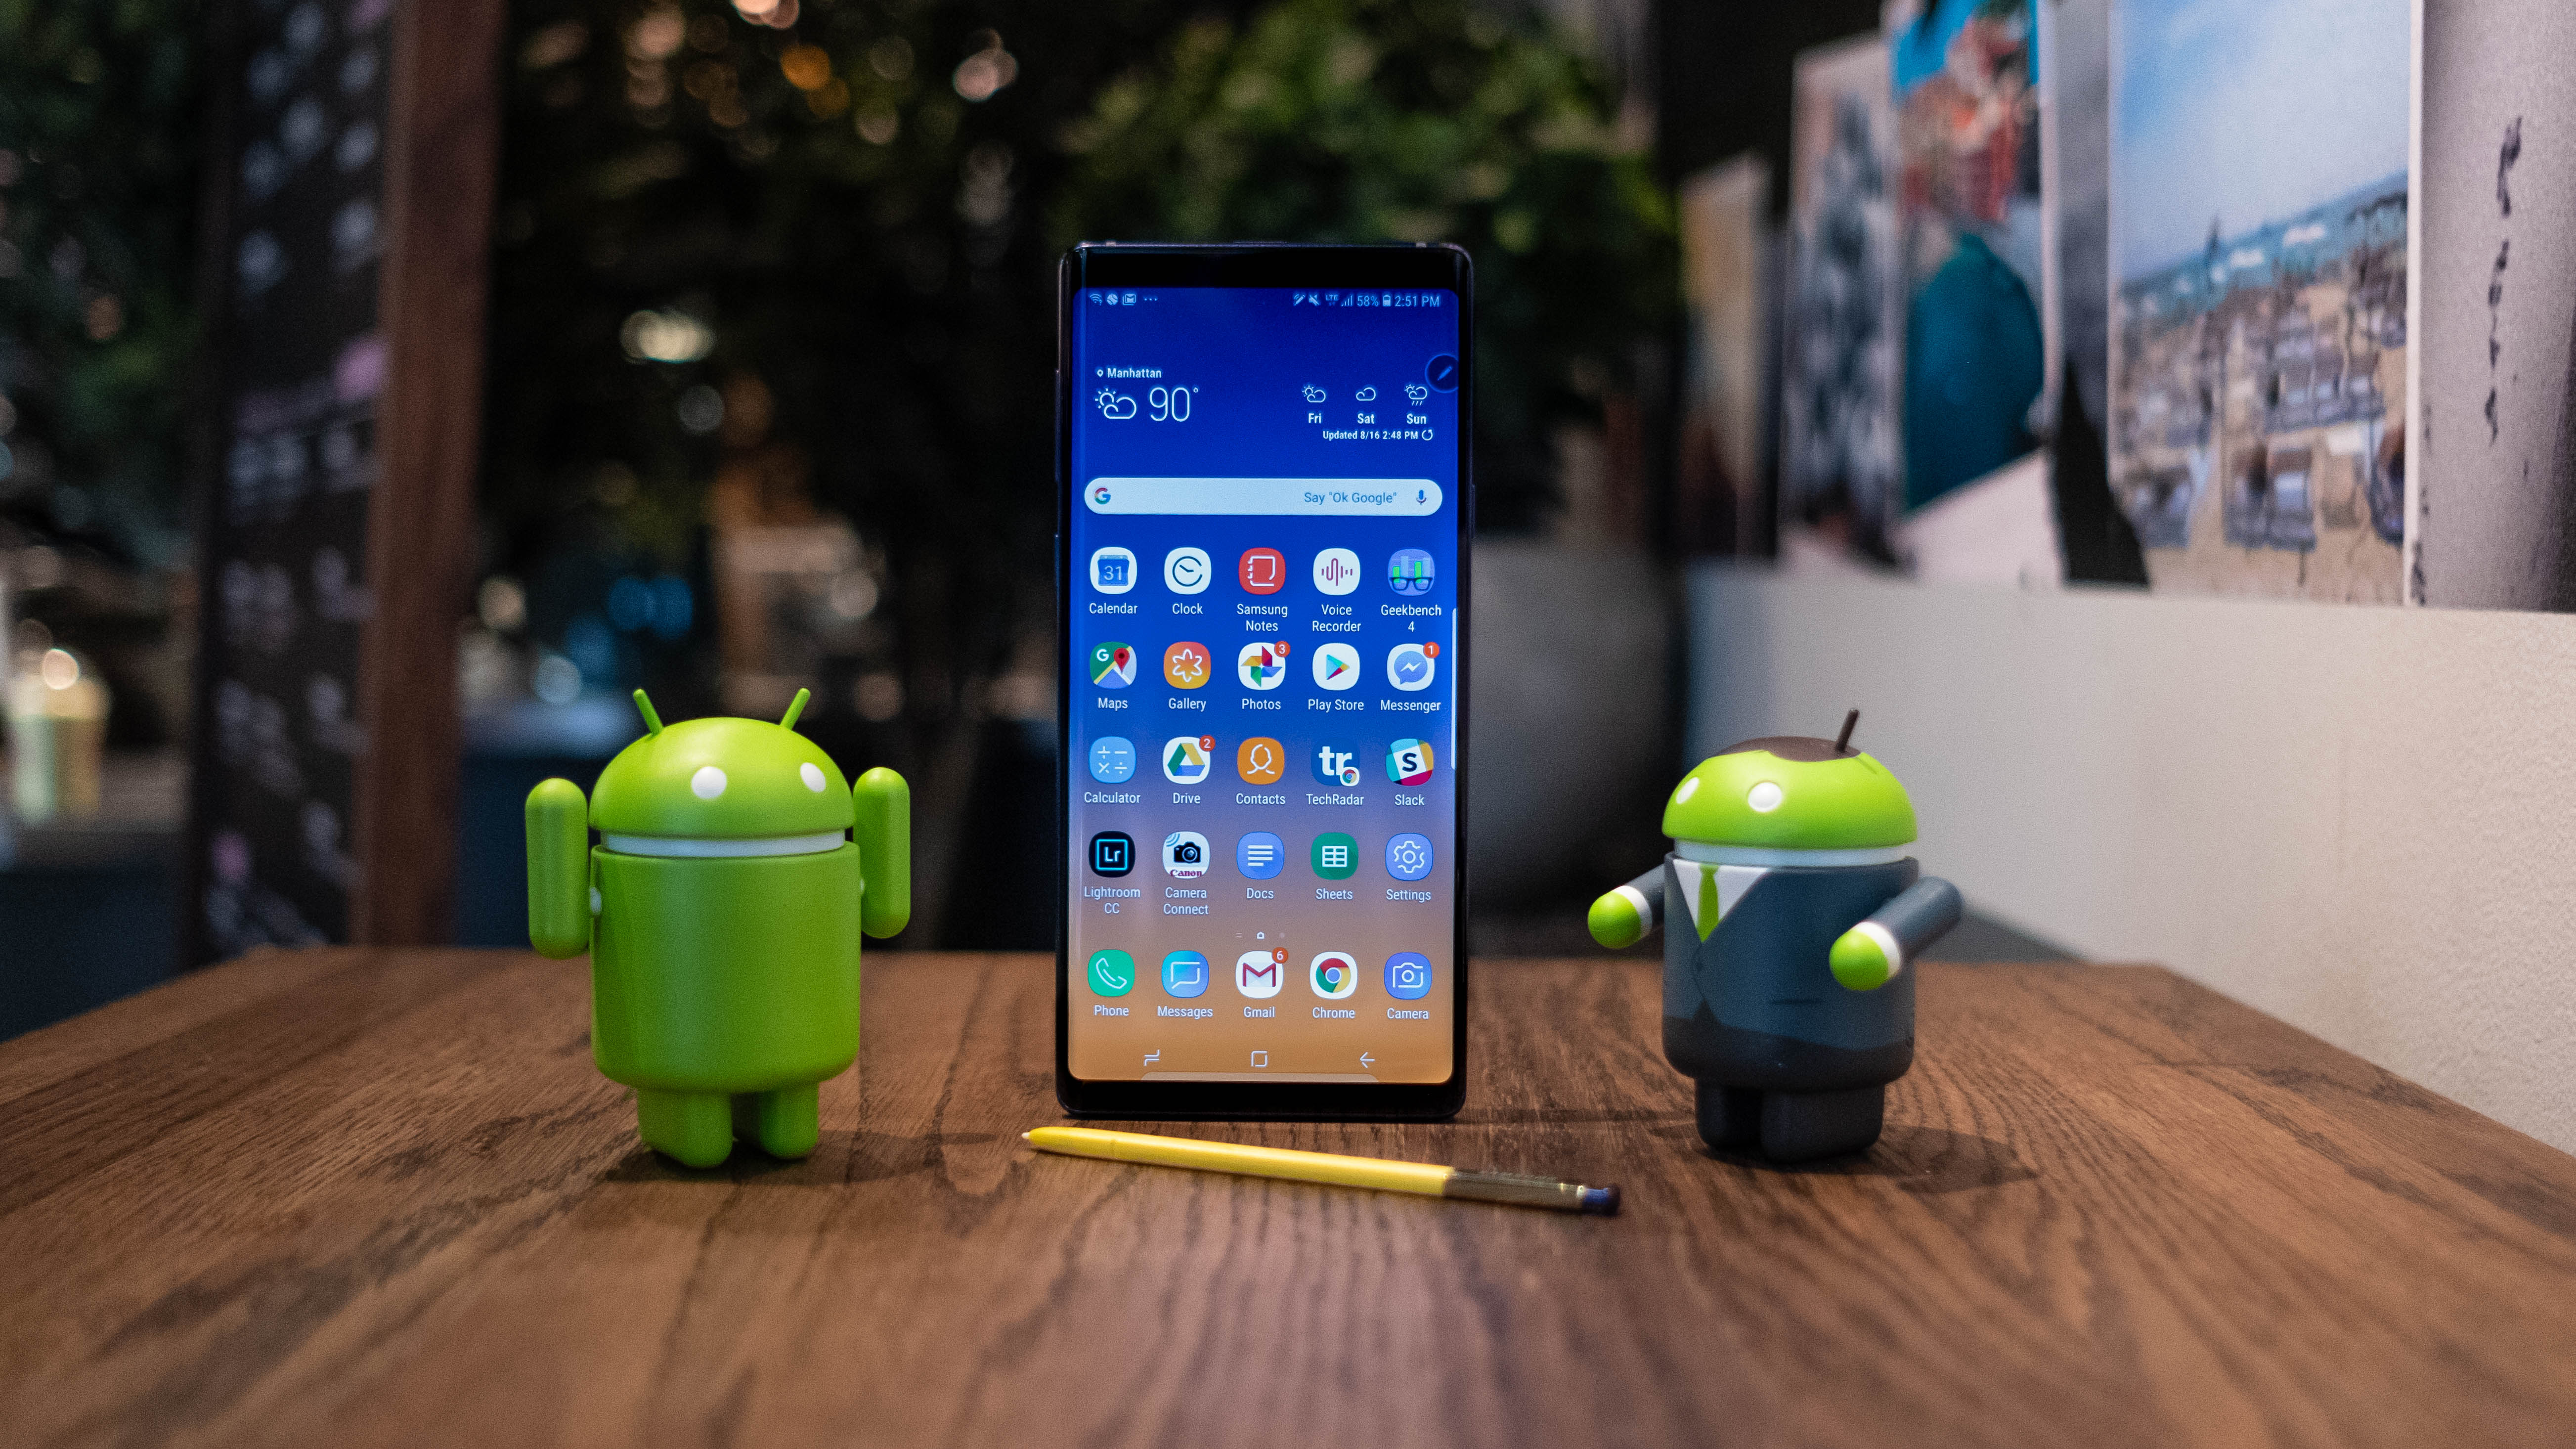 Best Samsung Phones 2019 Finding The Right Galaxy For You Tech News Log